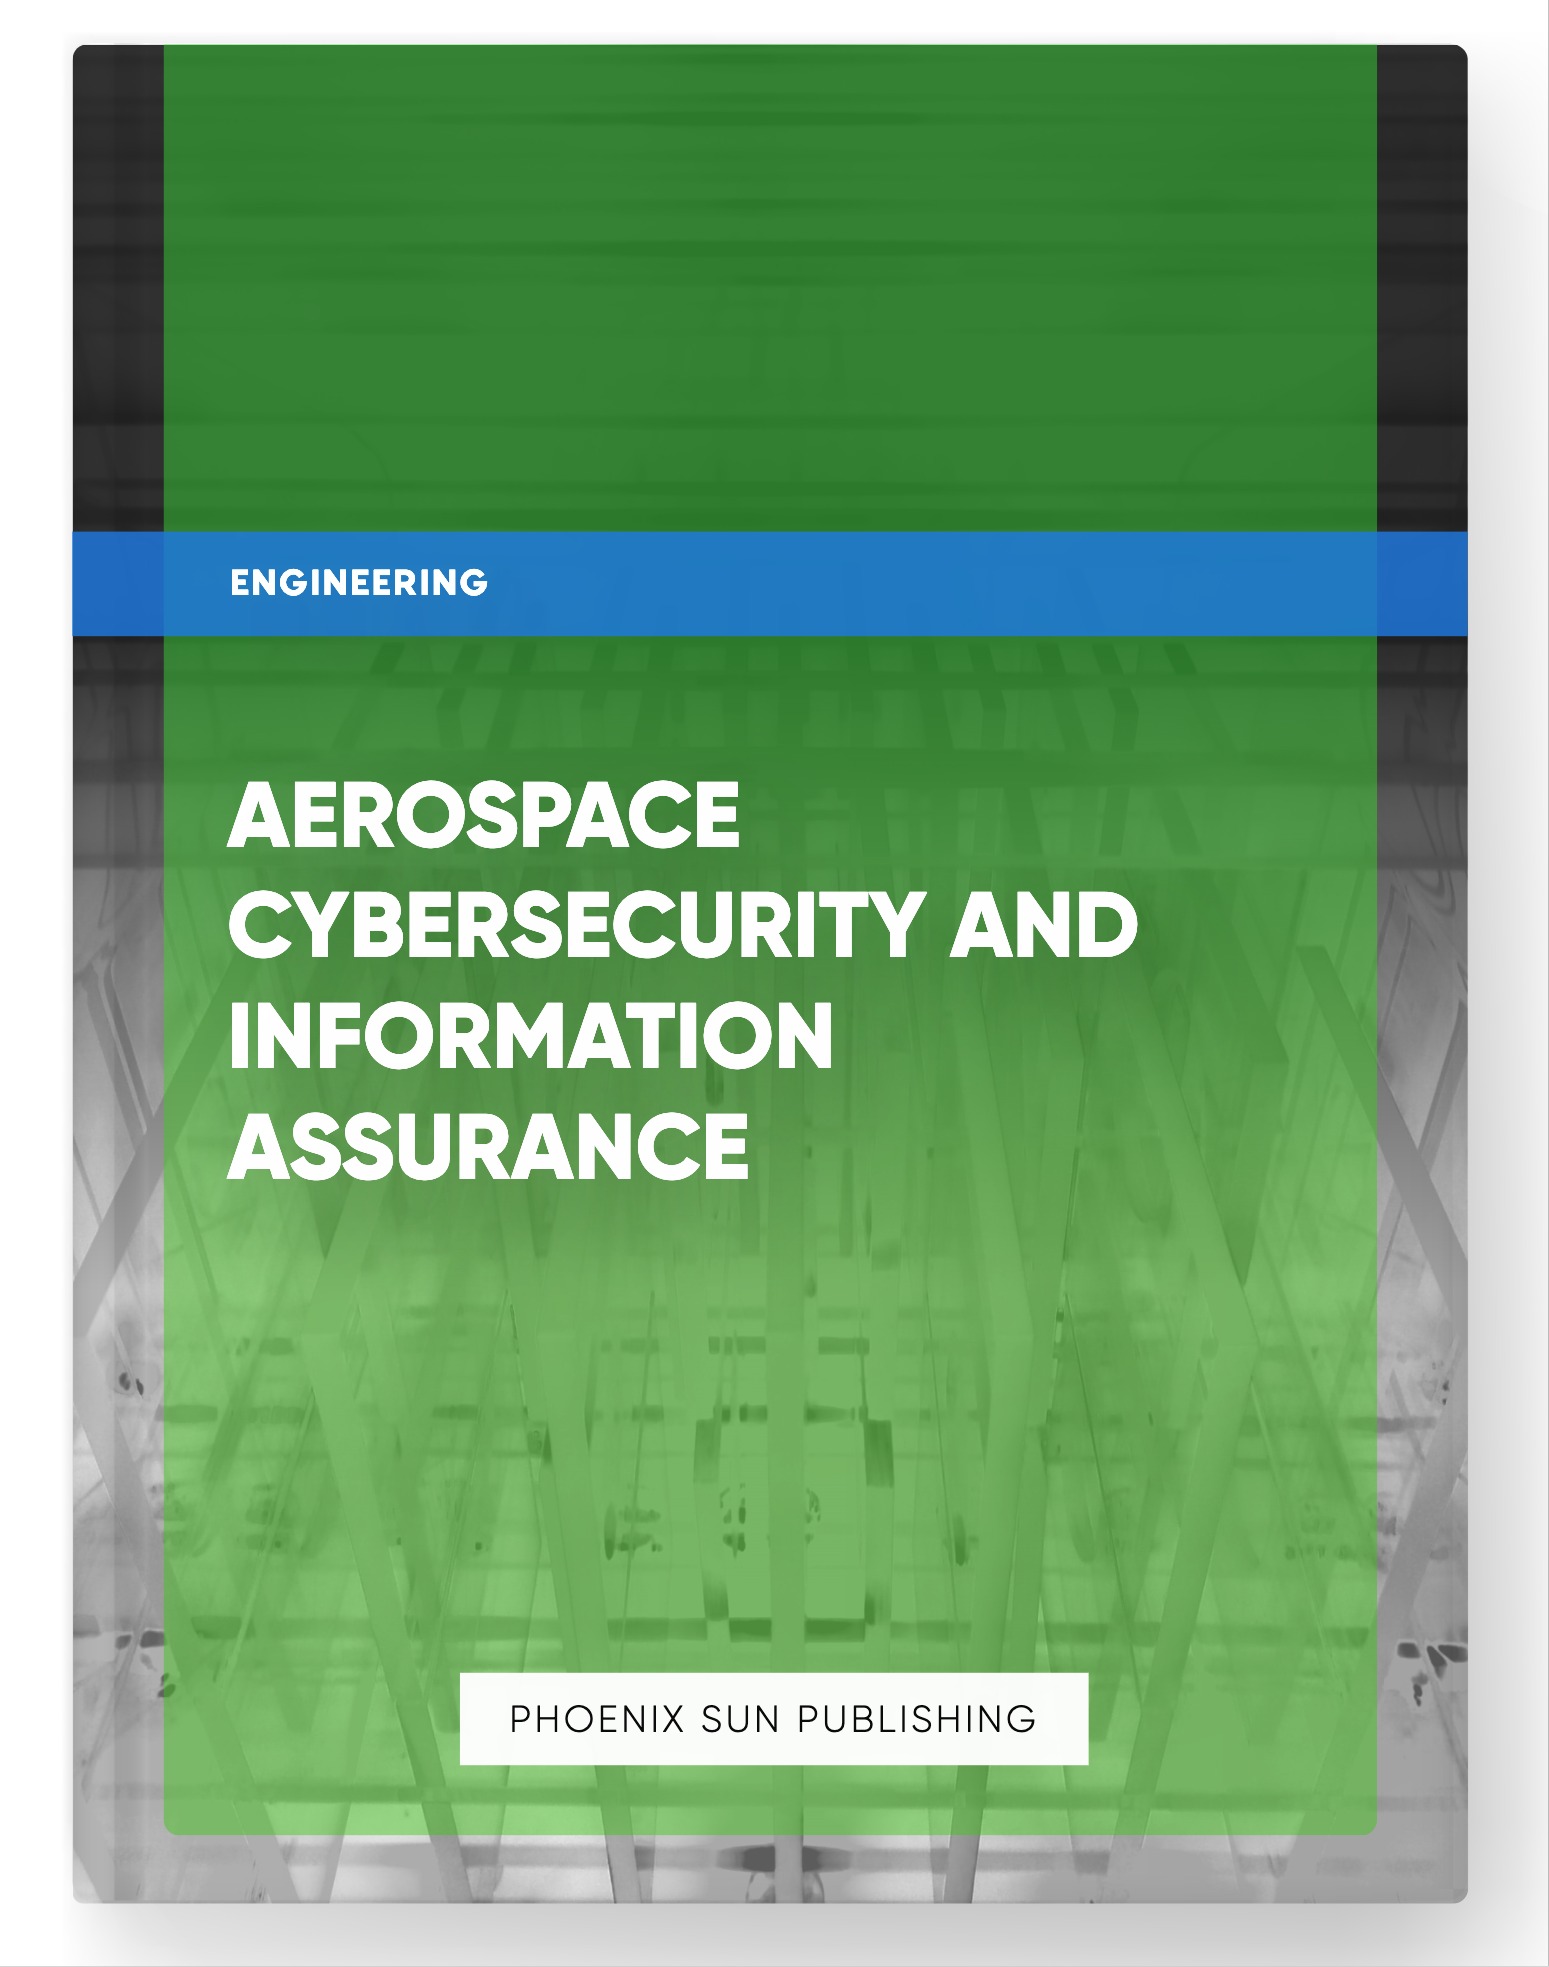 Aerospace Cybersecurity and Information Assurance